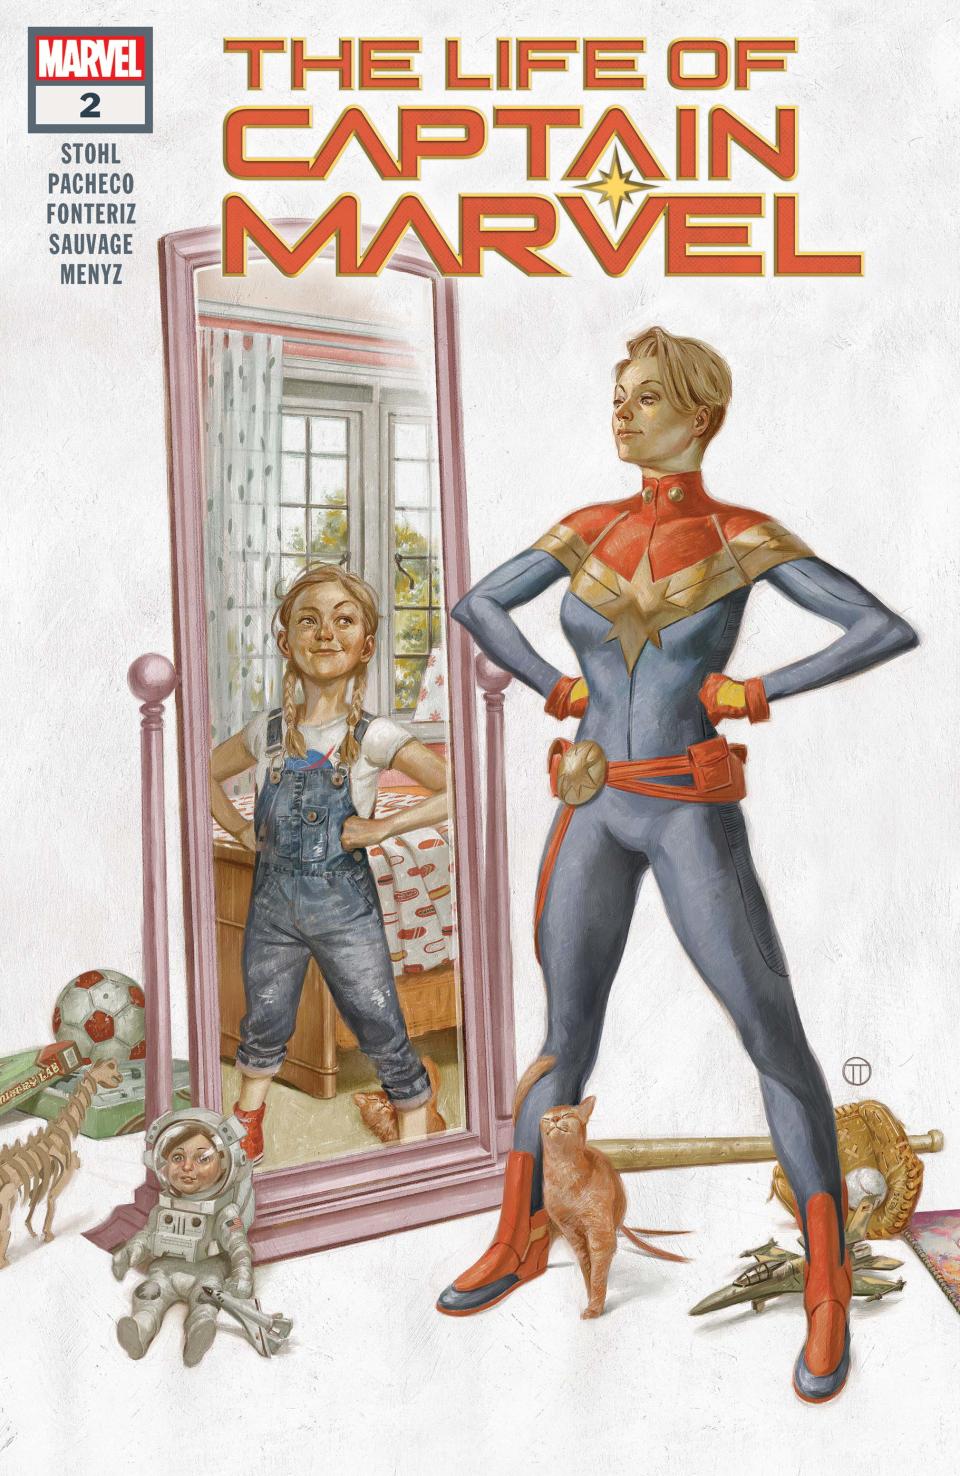 The five-issue “Life of Captain Marvel” mini-series re-tells the origin story of Carol Danvers a.k.a. Captain Marvel. PHOTO: Marvel Comics